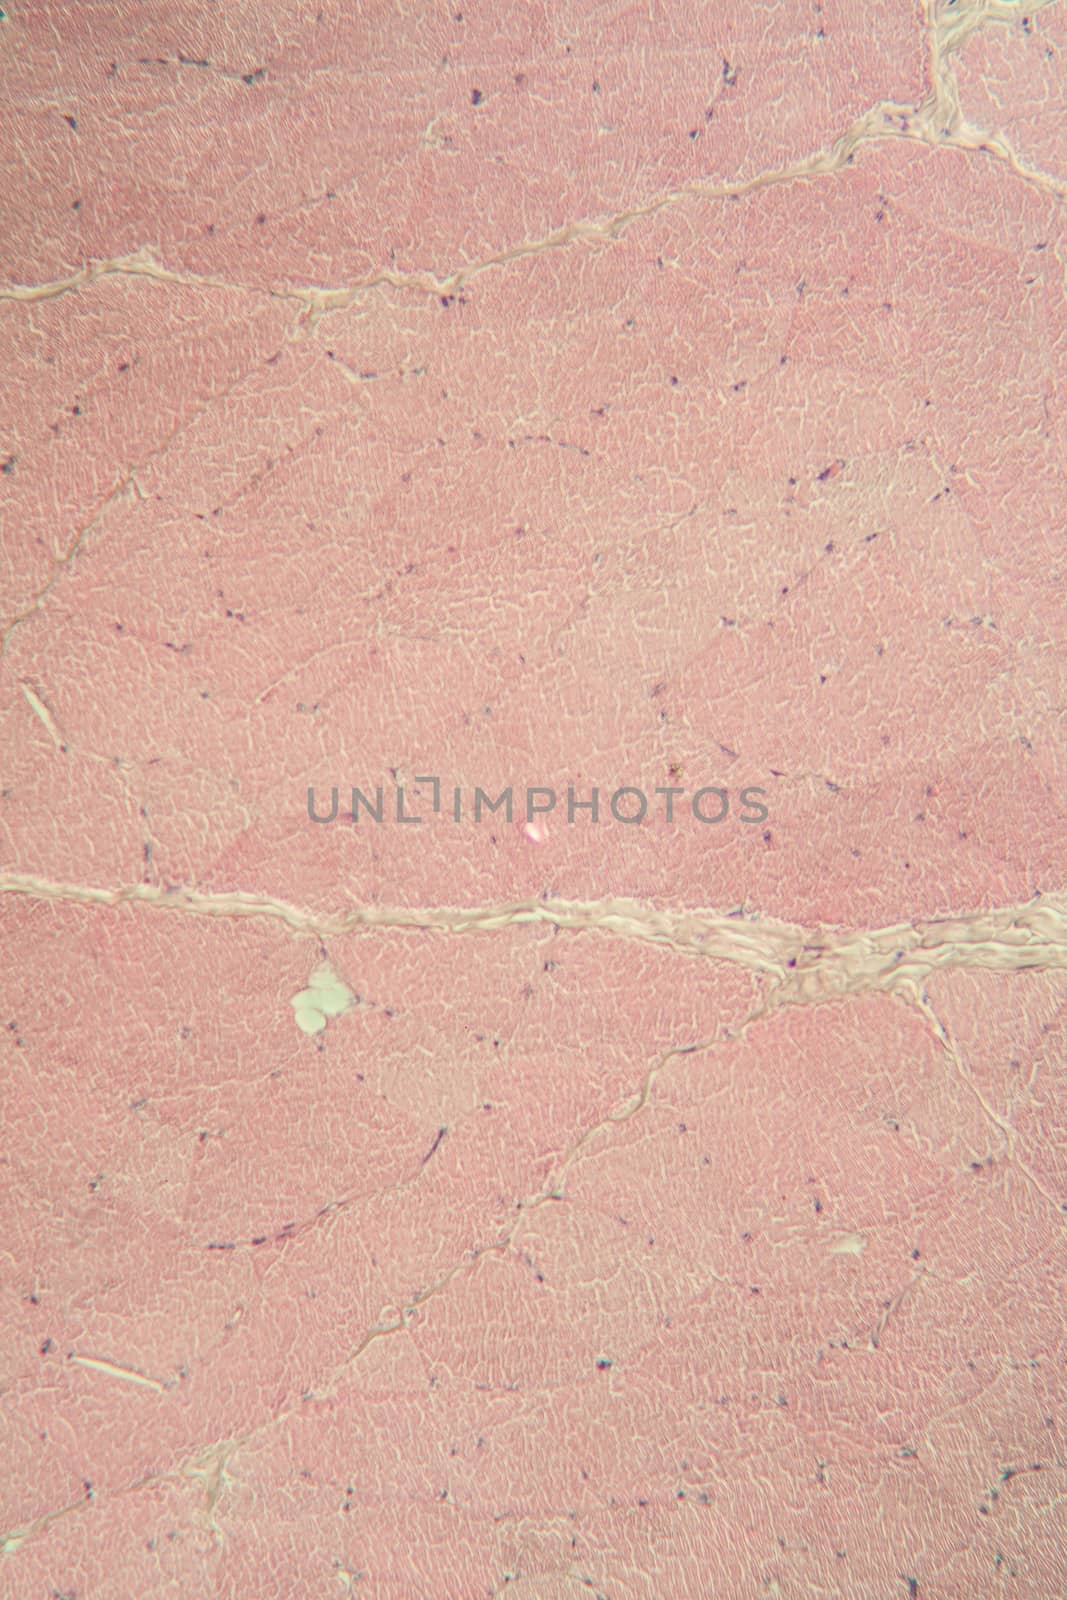 Skin under the microscope 100x by Dr-Lange